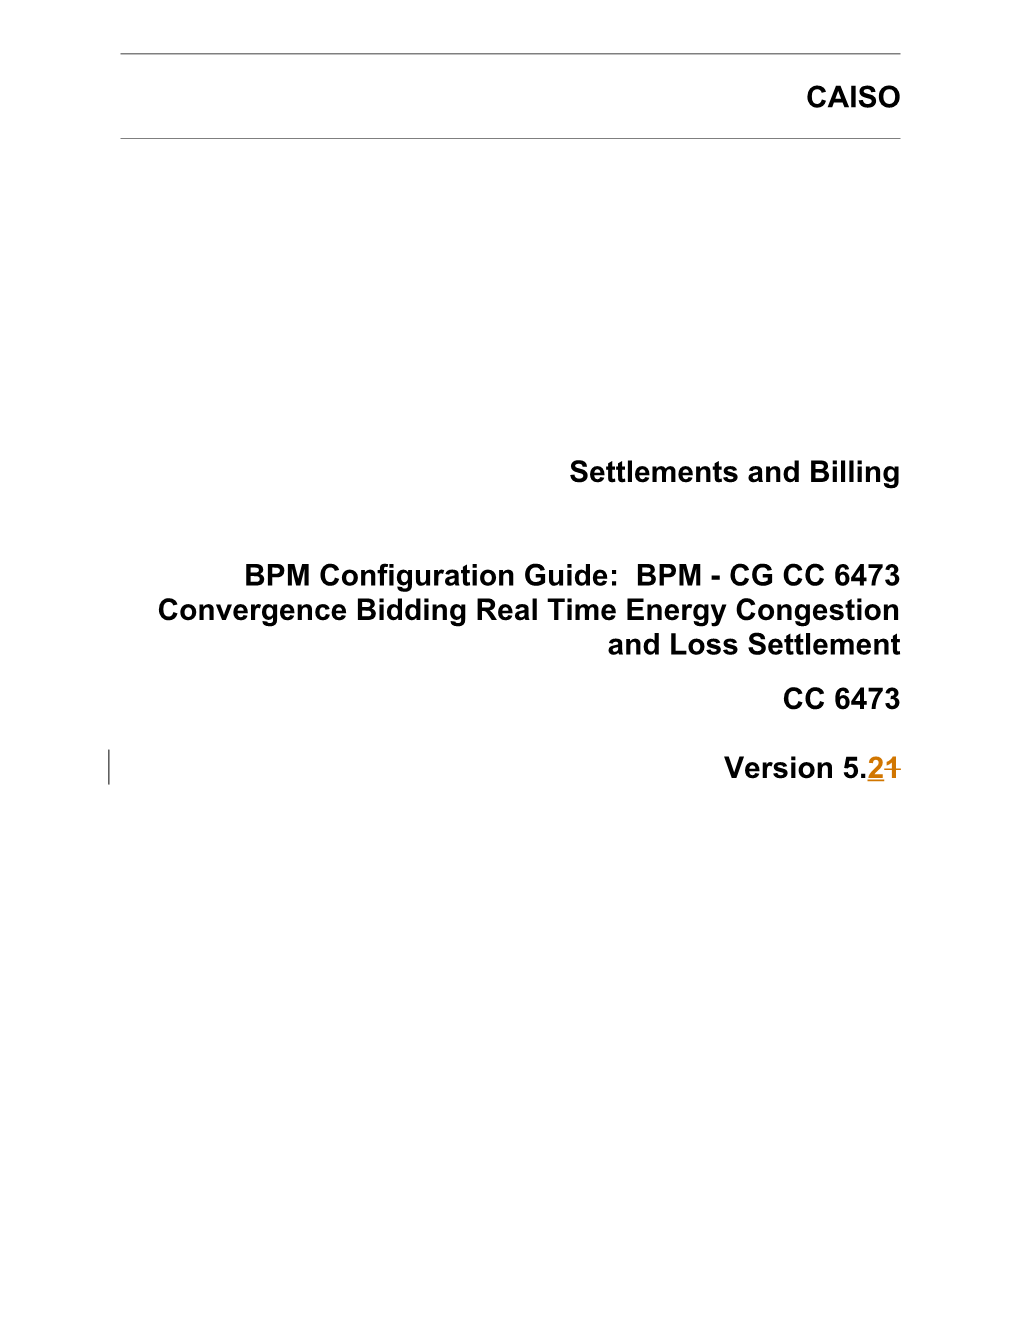 BPM - CG CC 6473 Convergence Bidding Real Time Energy Congestion and Loss Settlement s1